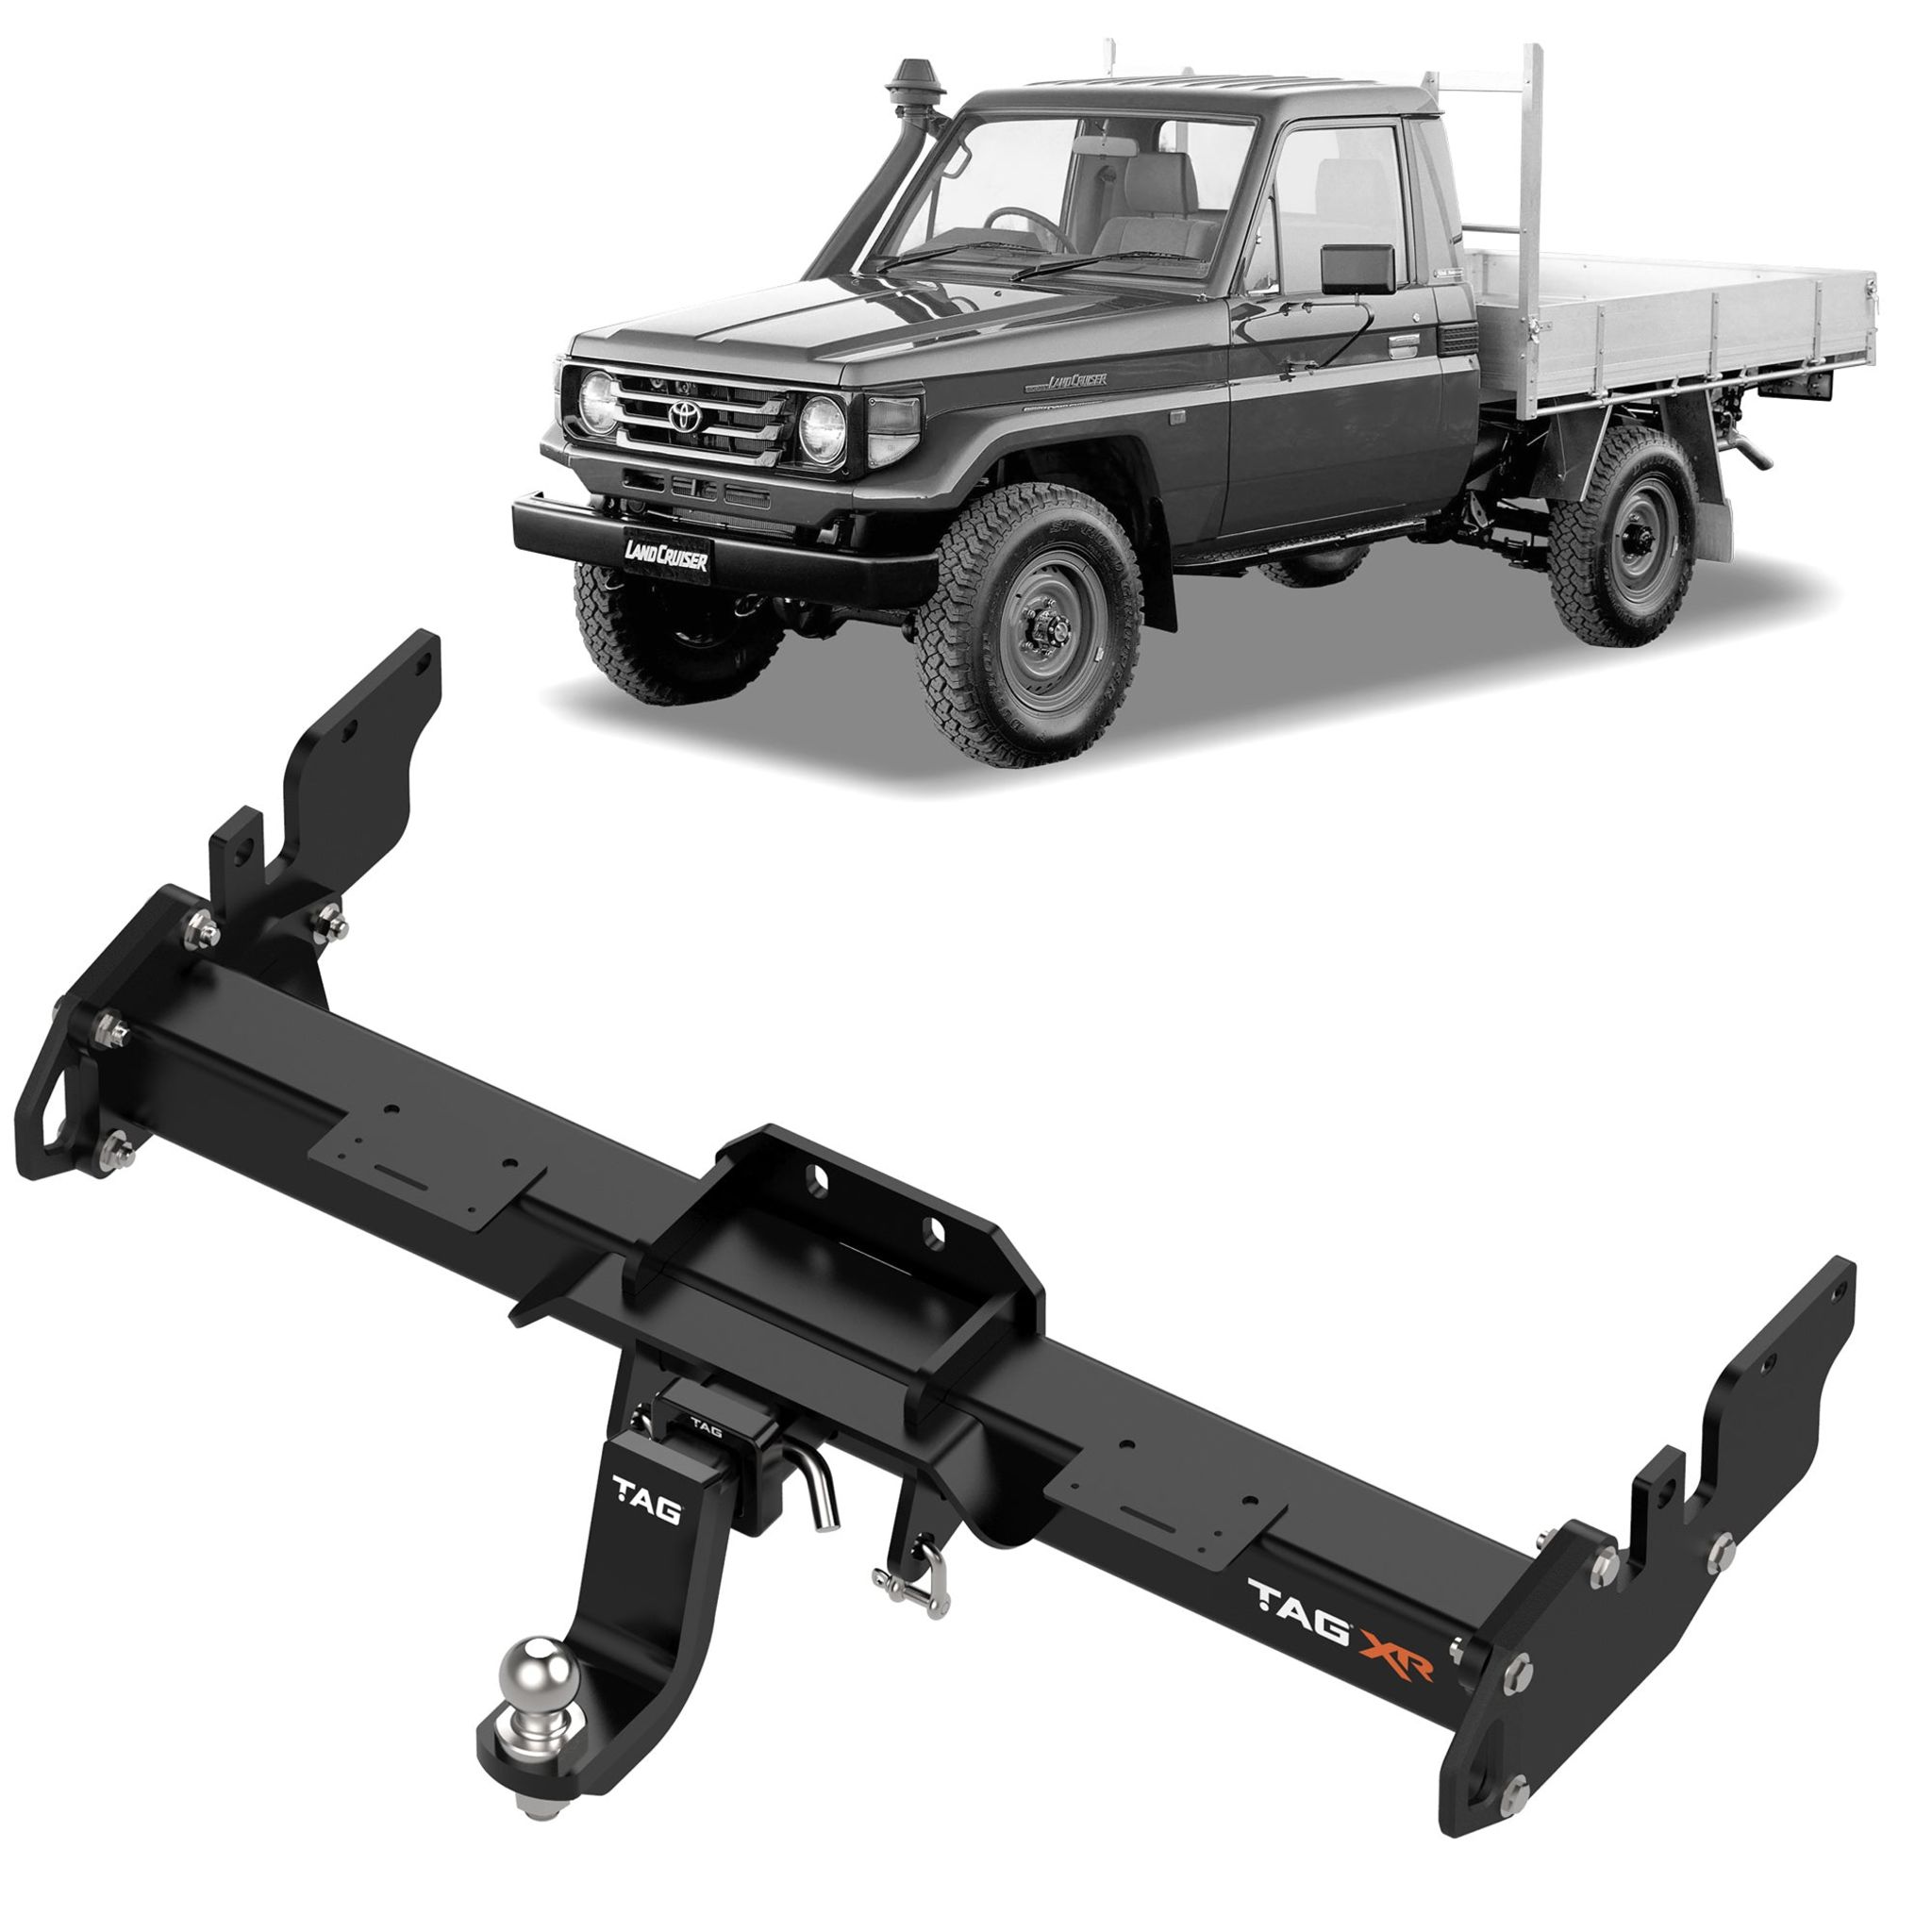 TAG 4x4 Recovery Towbar to suit Toyota Landcruiser (10/1996 - 07/2012)